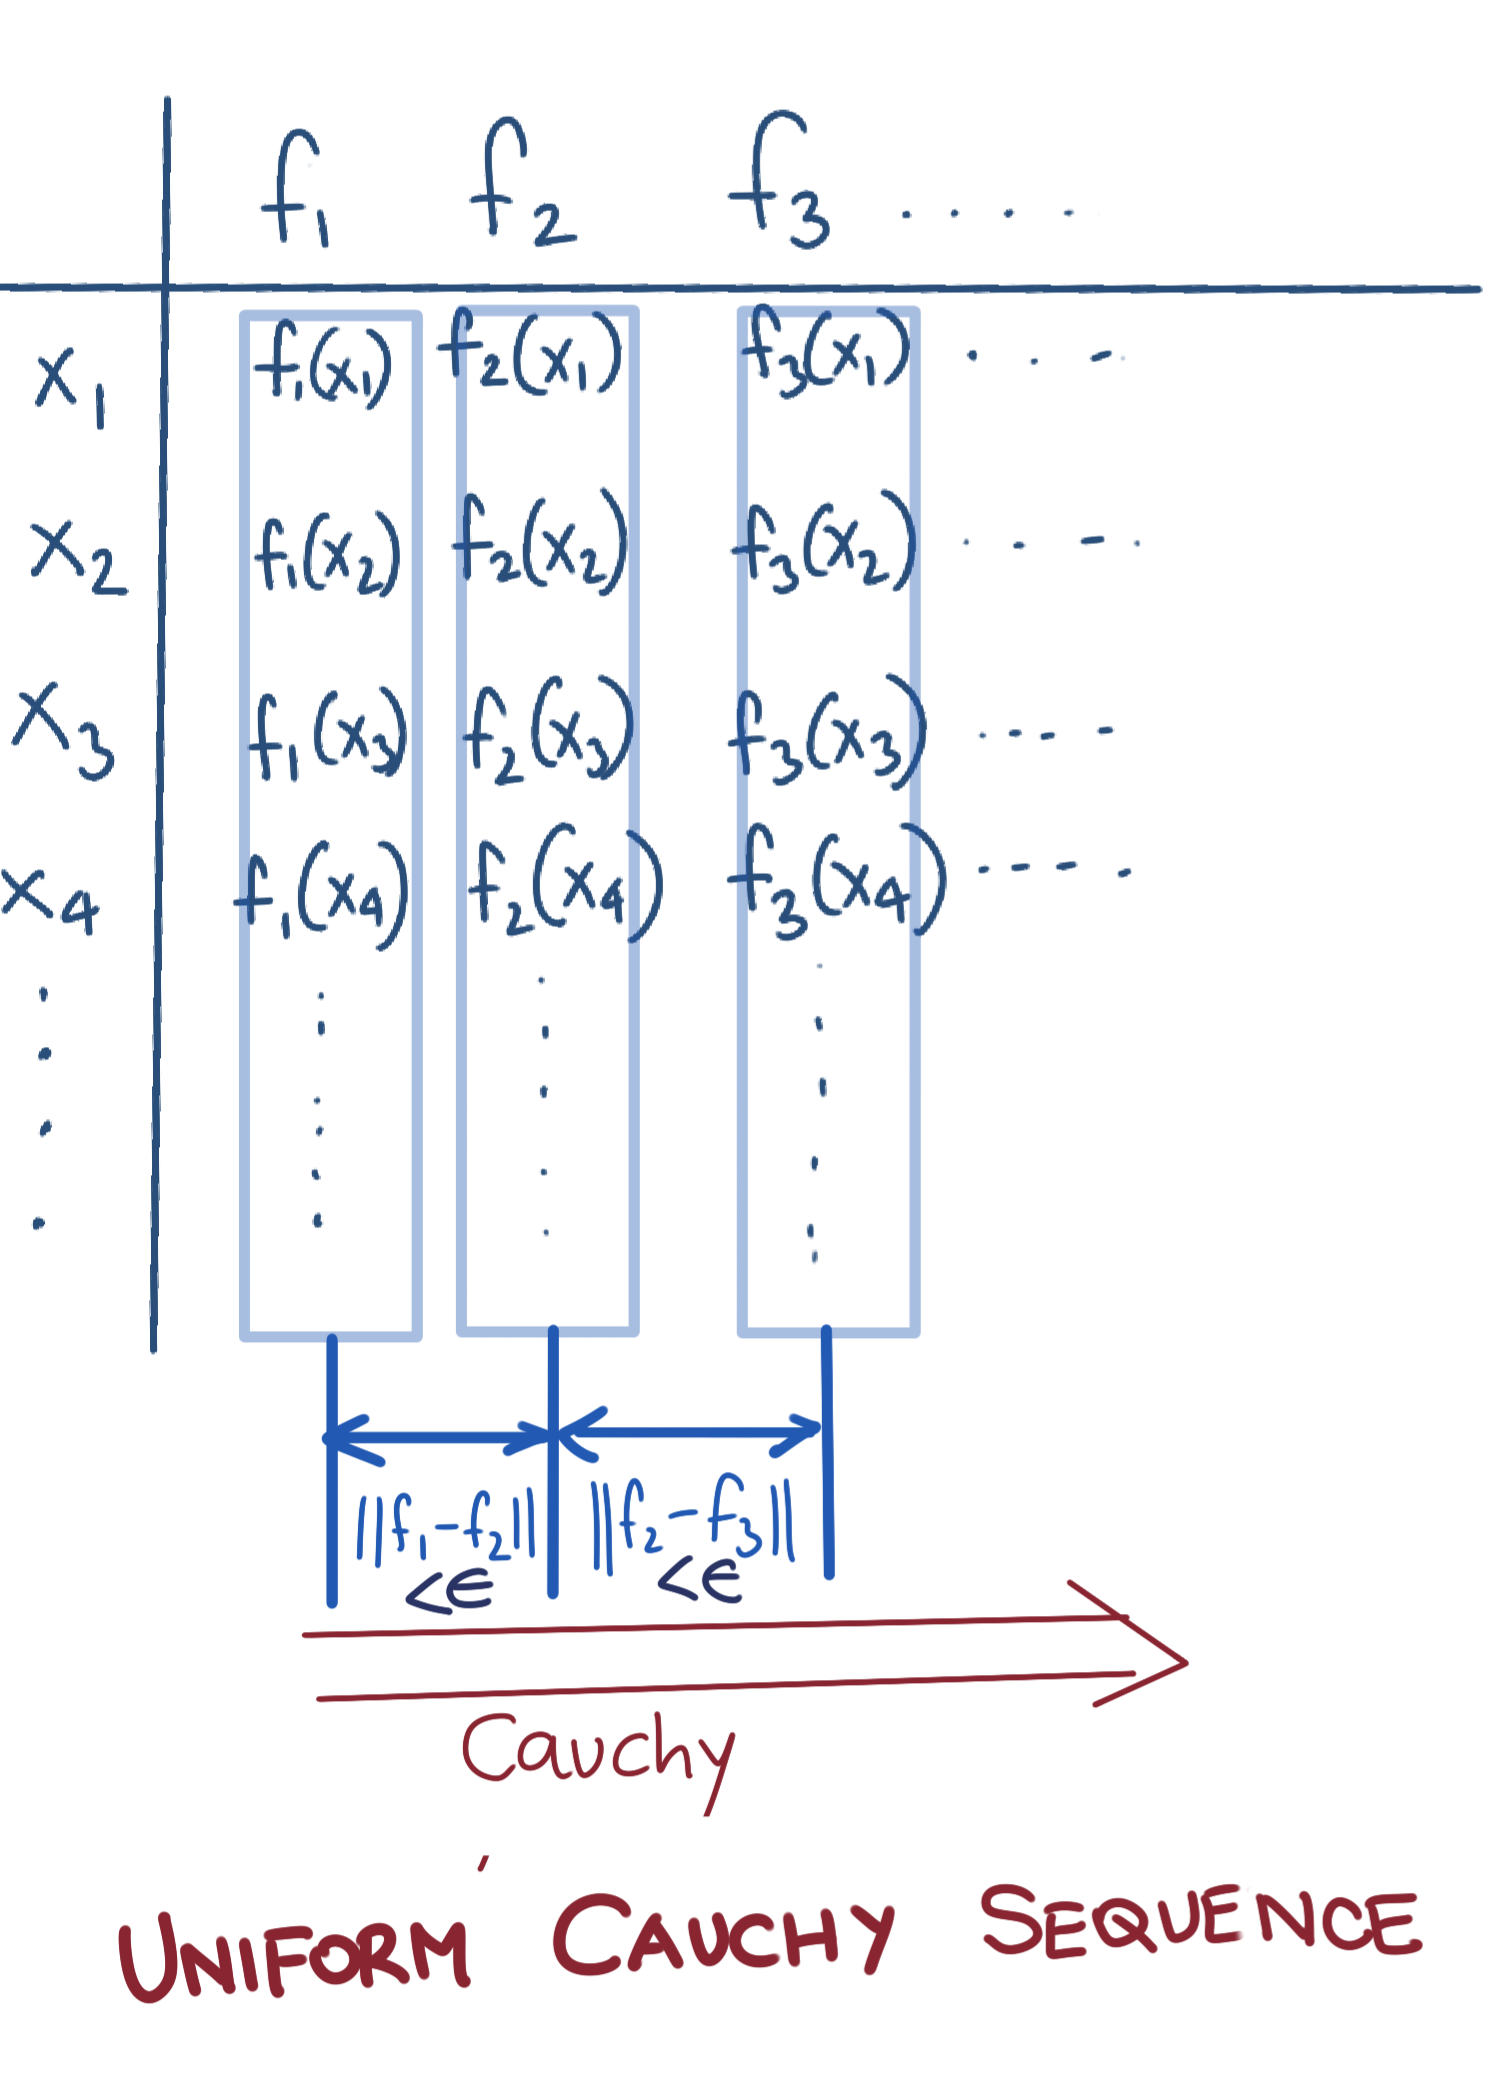 Uniform Cauchy Sequence of Functions